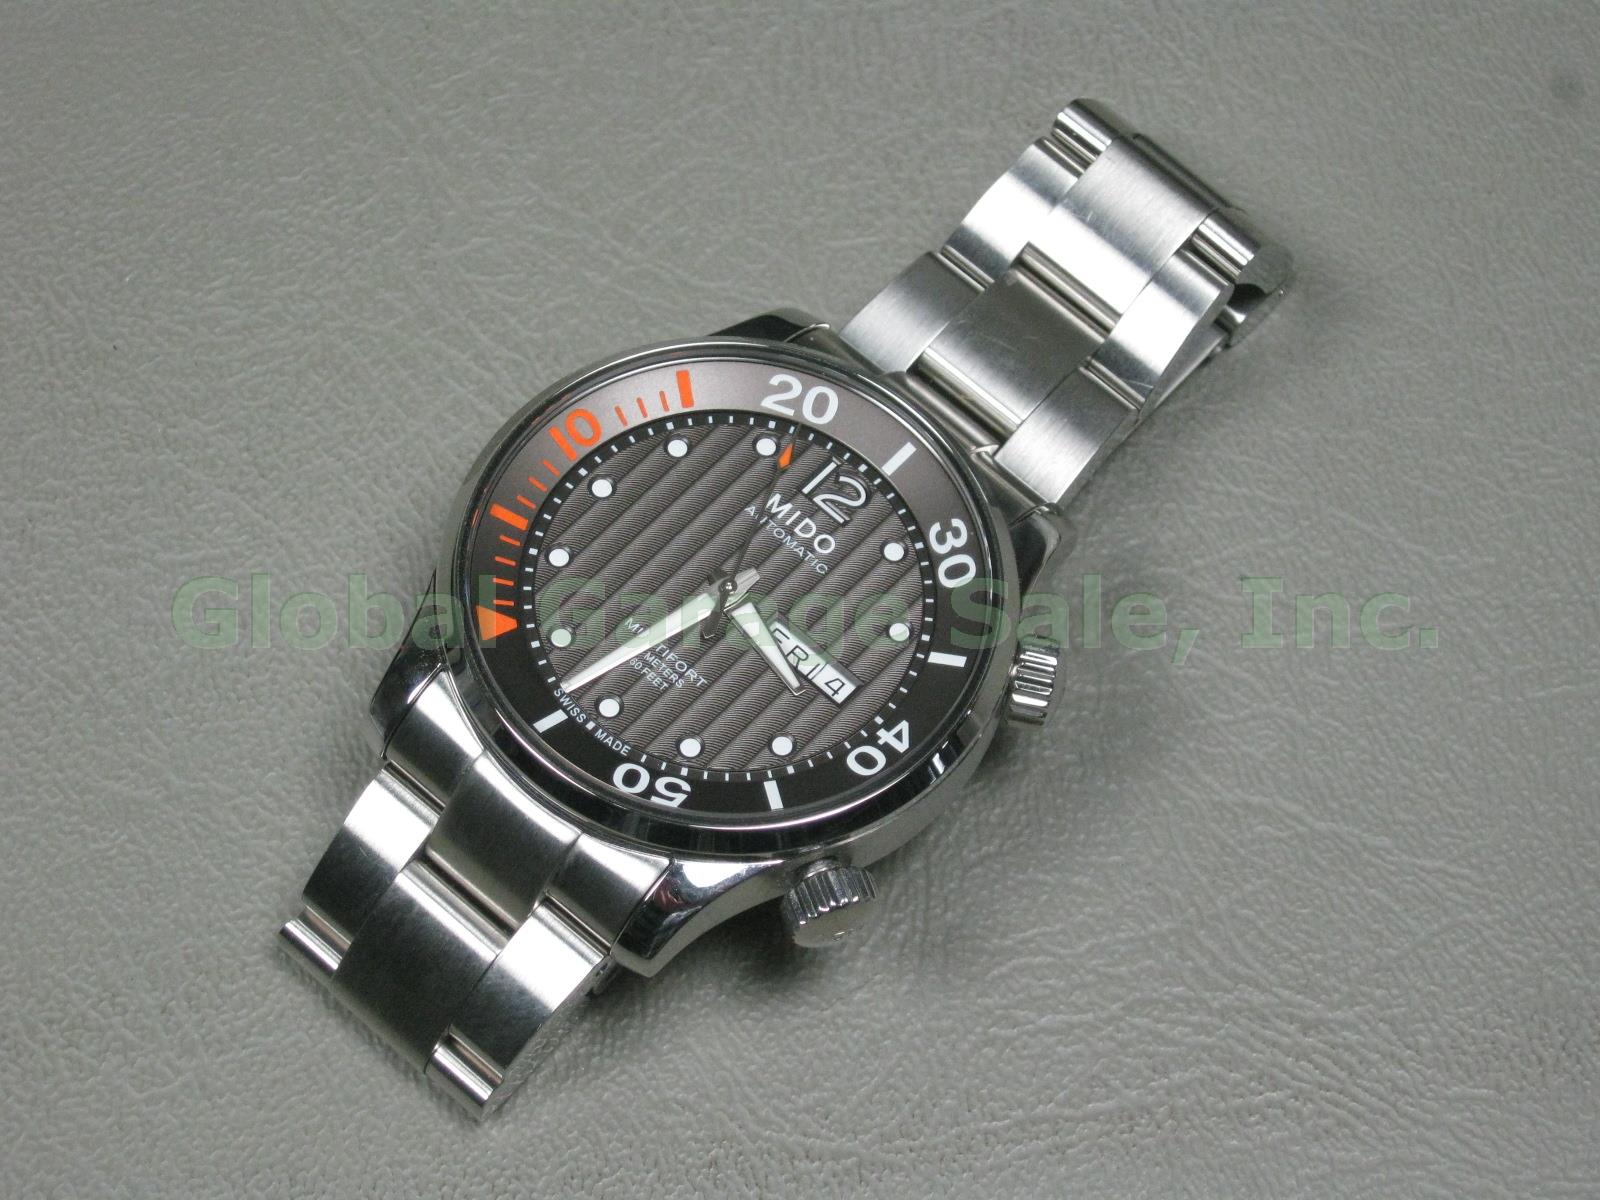 Mido Multifort M005930 A 42mm Two Crown Automatic 200M Swiss Diver Watch W/ Box+ 3